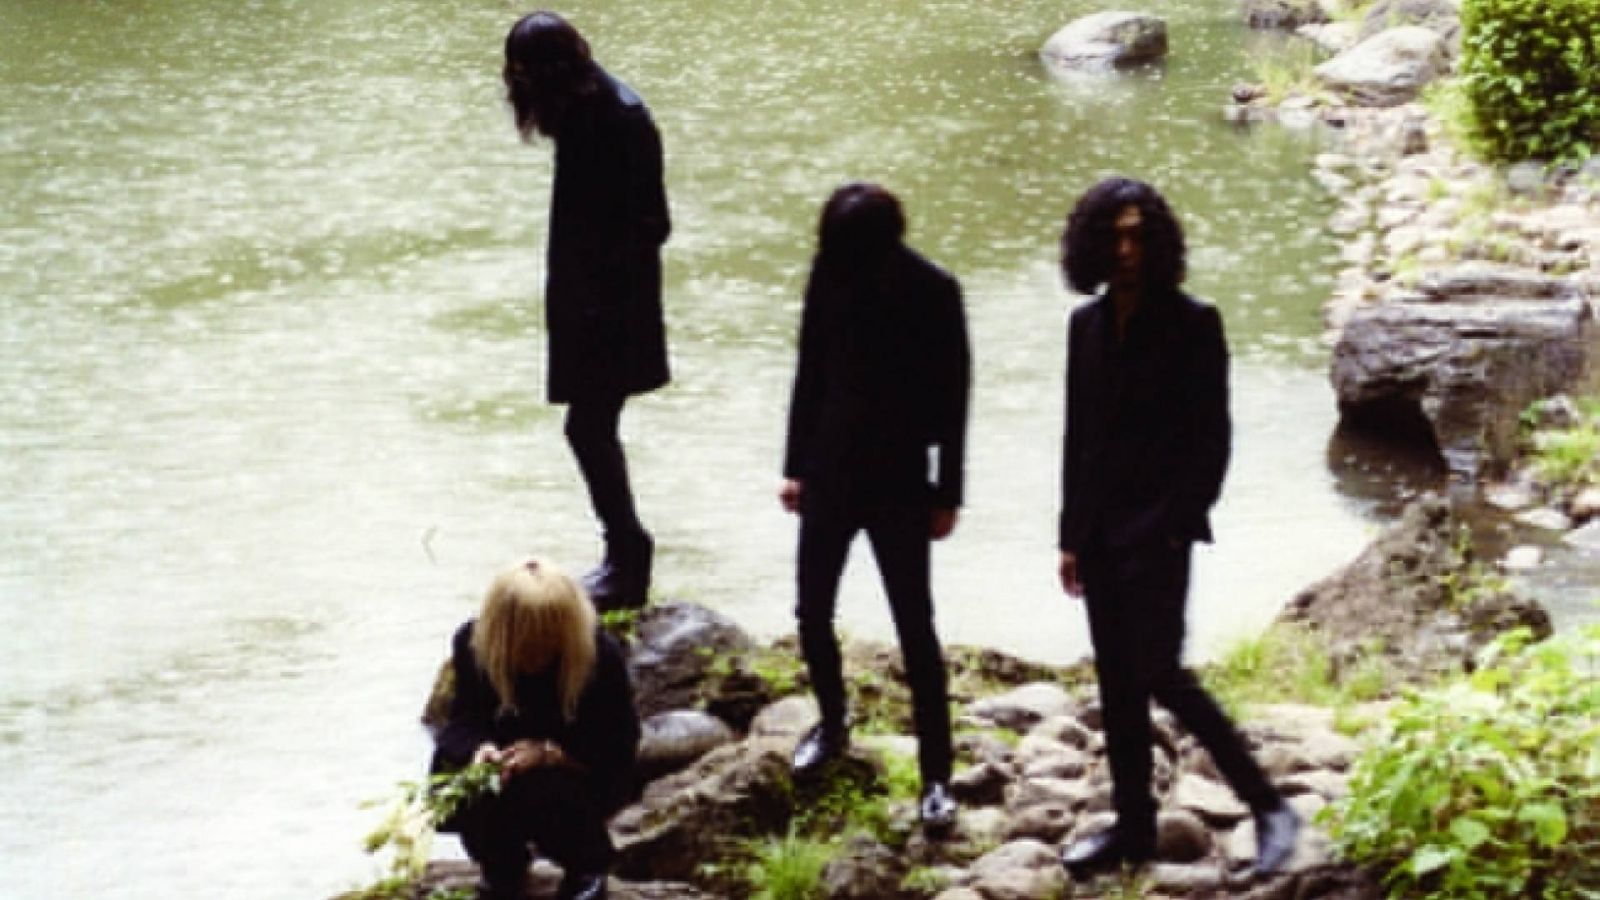 News from THE NOVEMBERS © THE NOVEMBERS